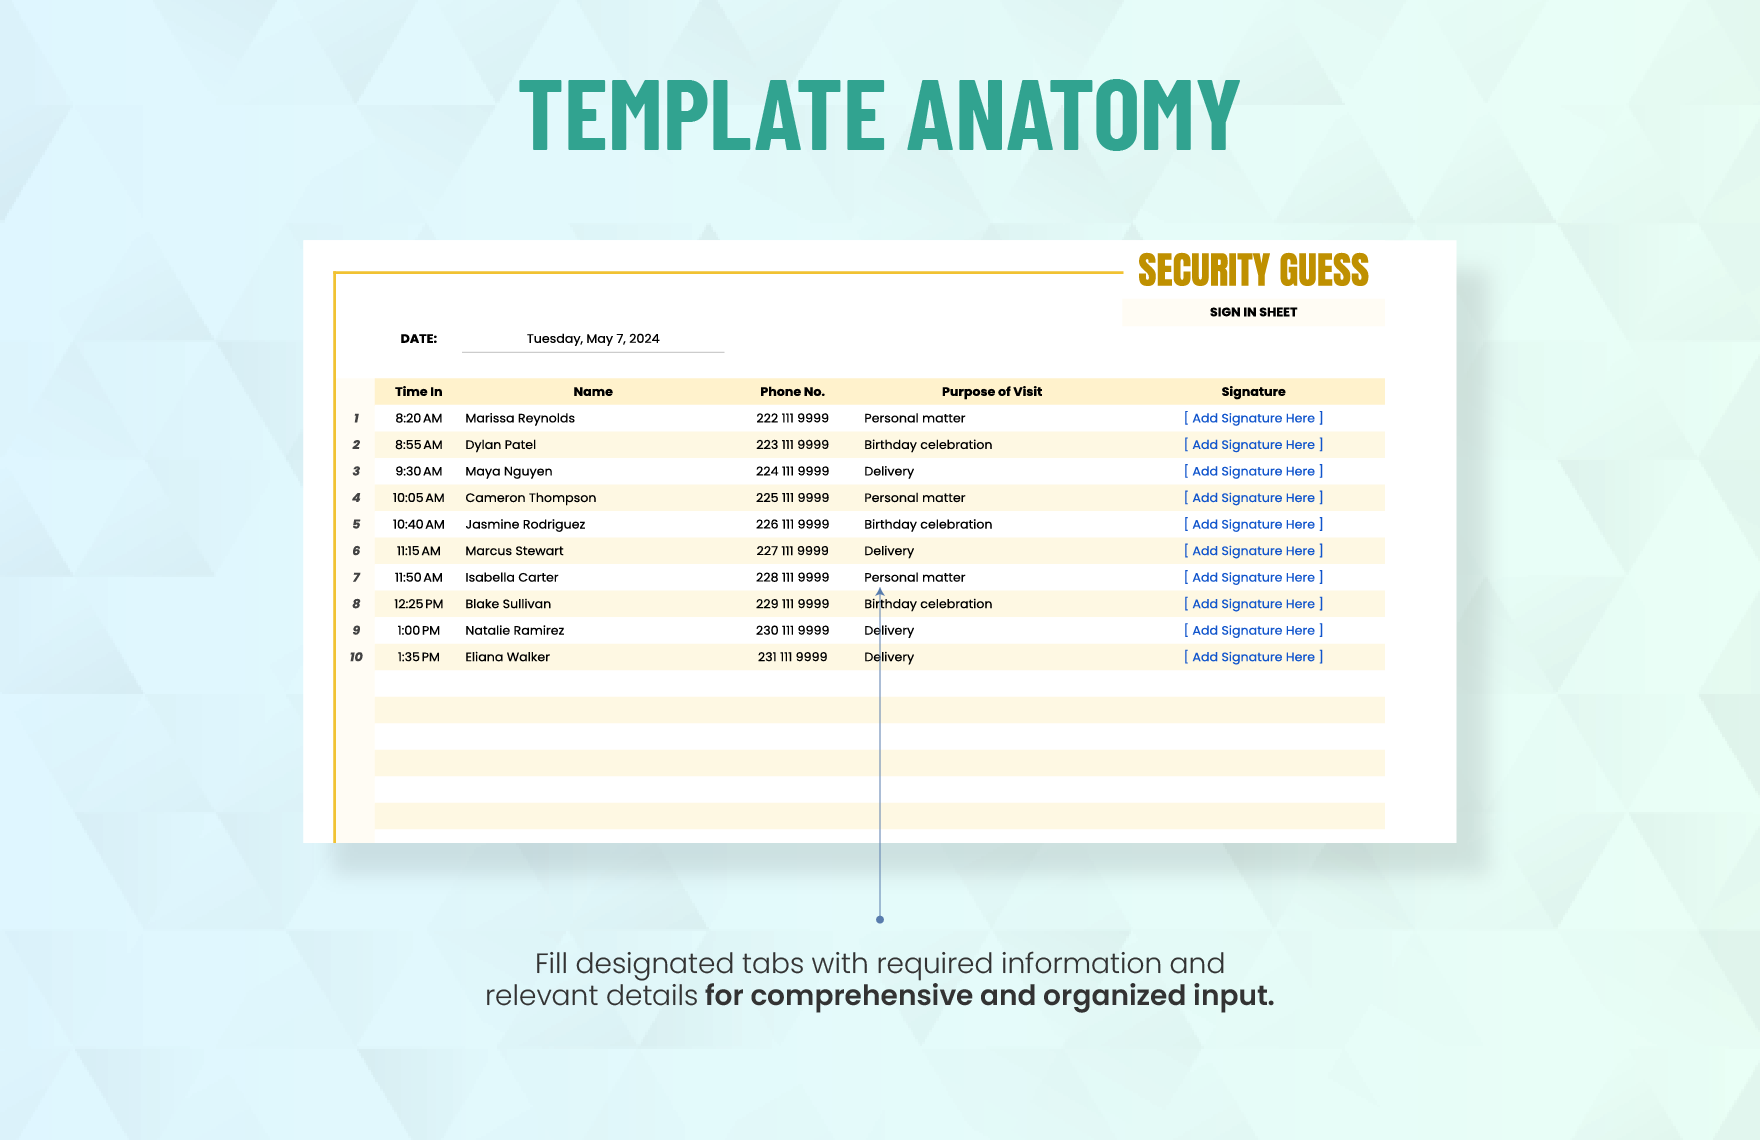 Security Guess Sign in Sheet Template